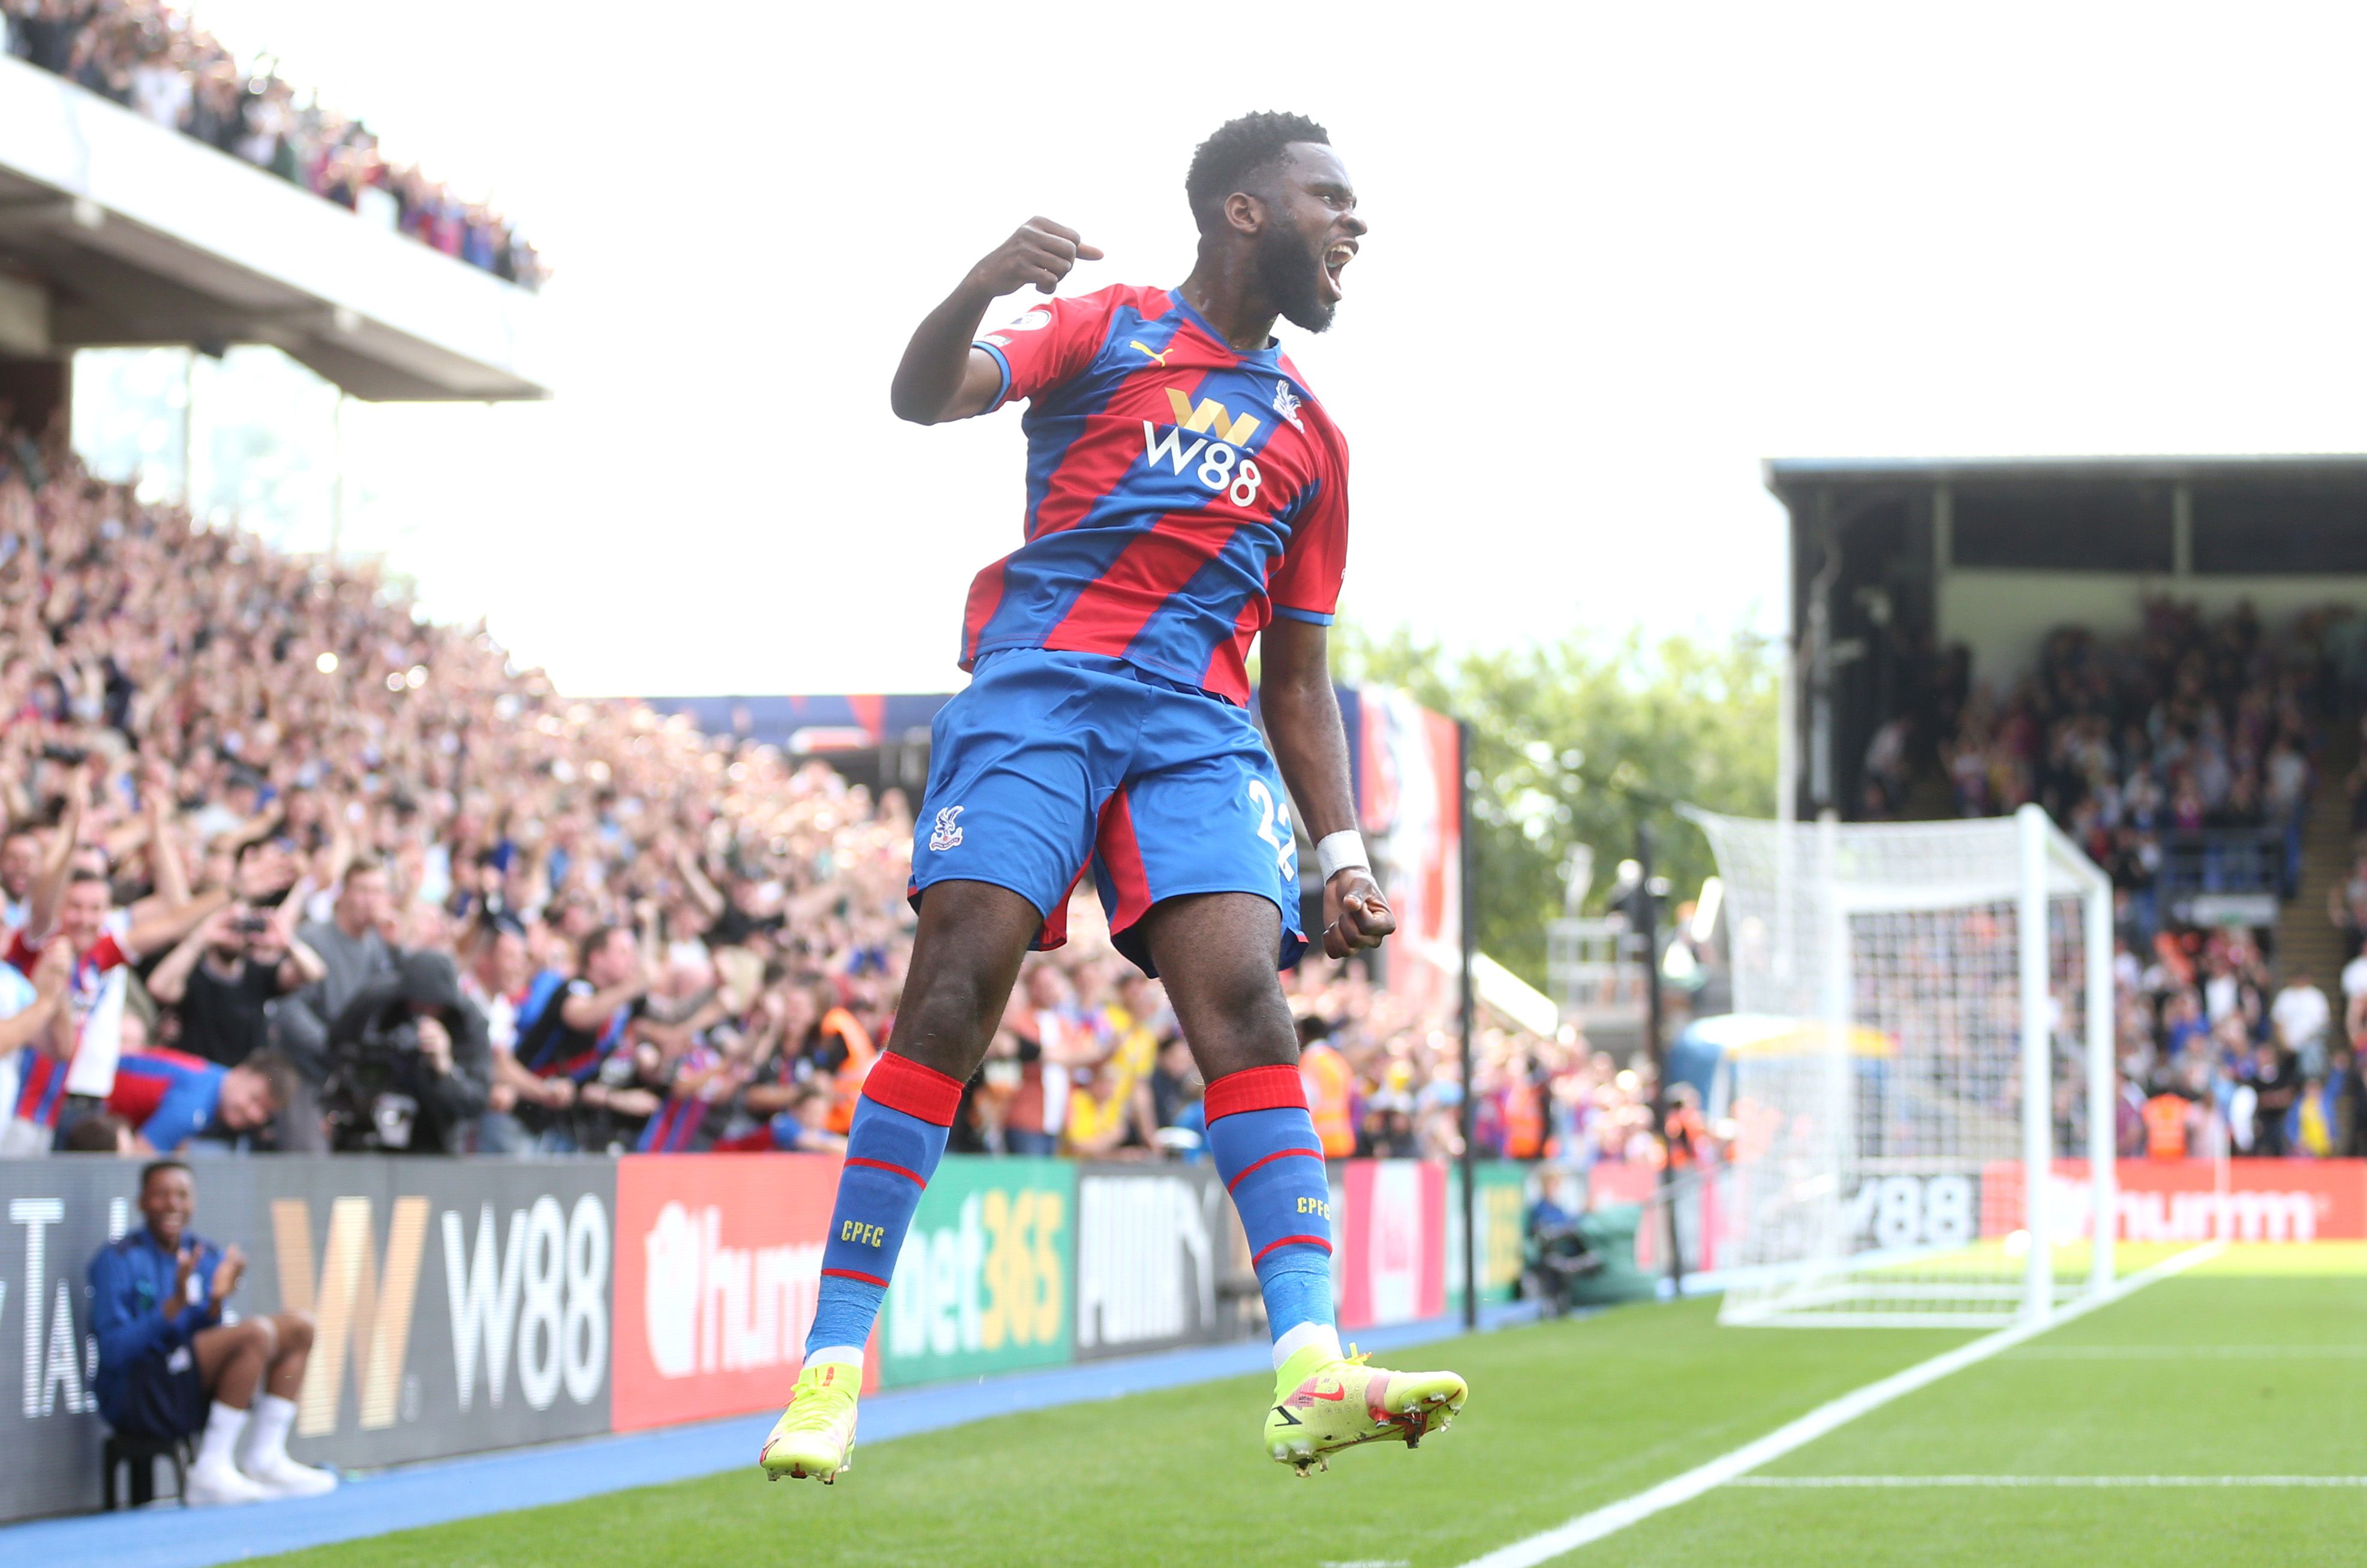 Odsonne Edouard of Crystal Palace celebrates after scoring their side's third goal during the Premier League match between Crystal Palace and Tottenham Hotspur at Selhurst Park on September 11, 2021 in London, England.